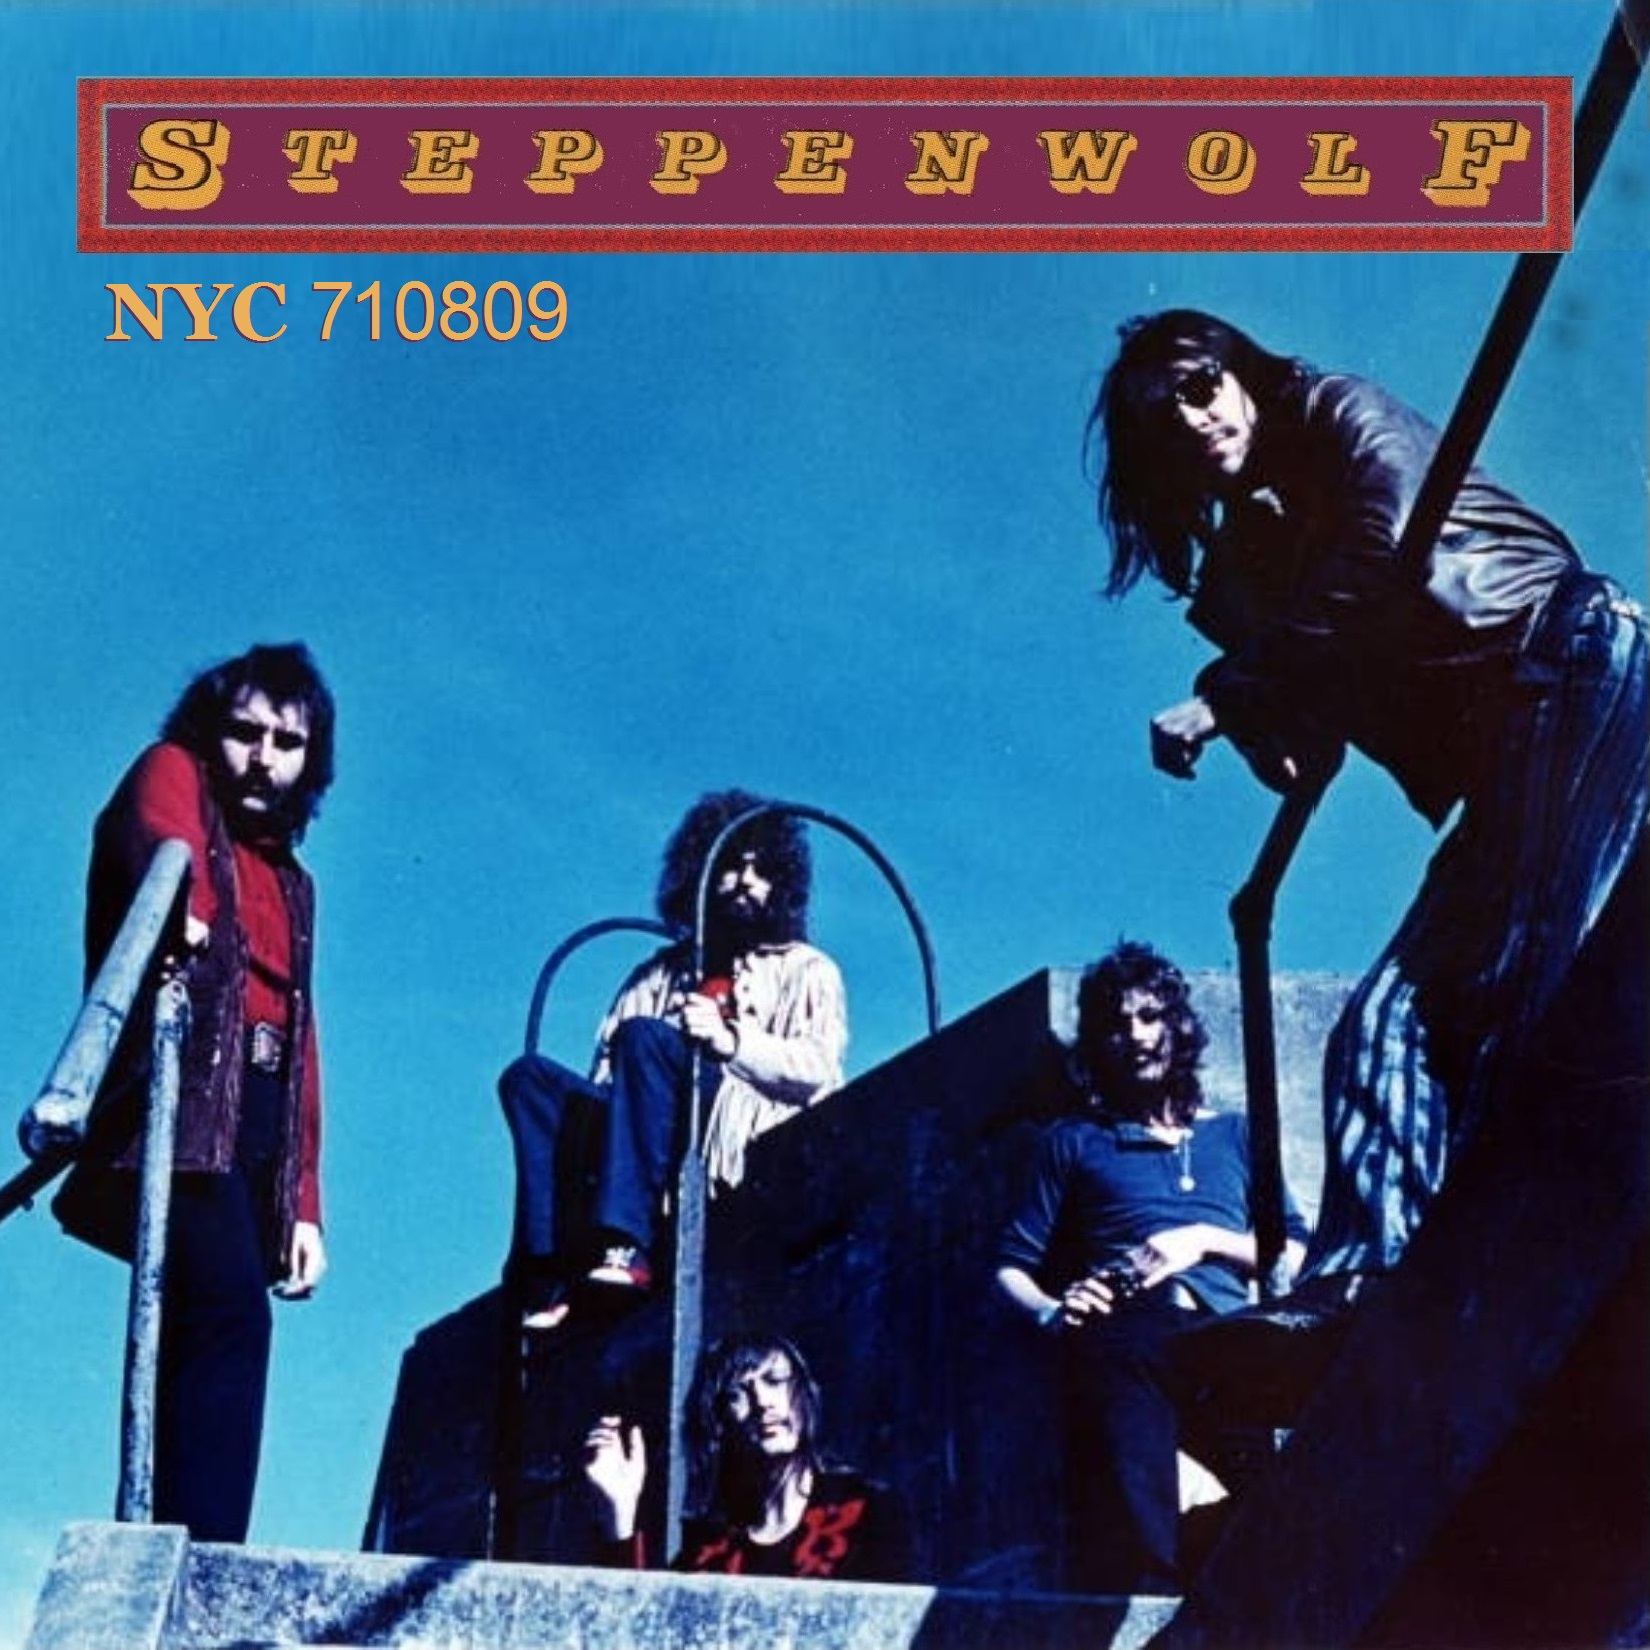 Steppenwolf1971-08-09CentralParkNYC (2).png